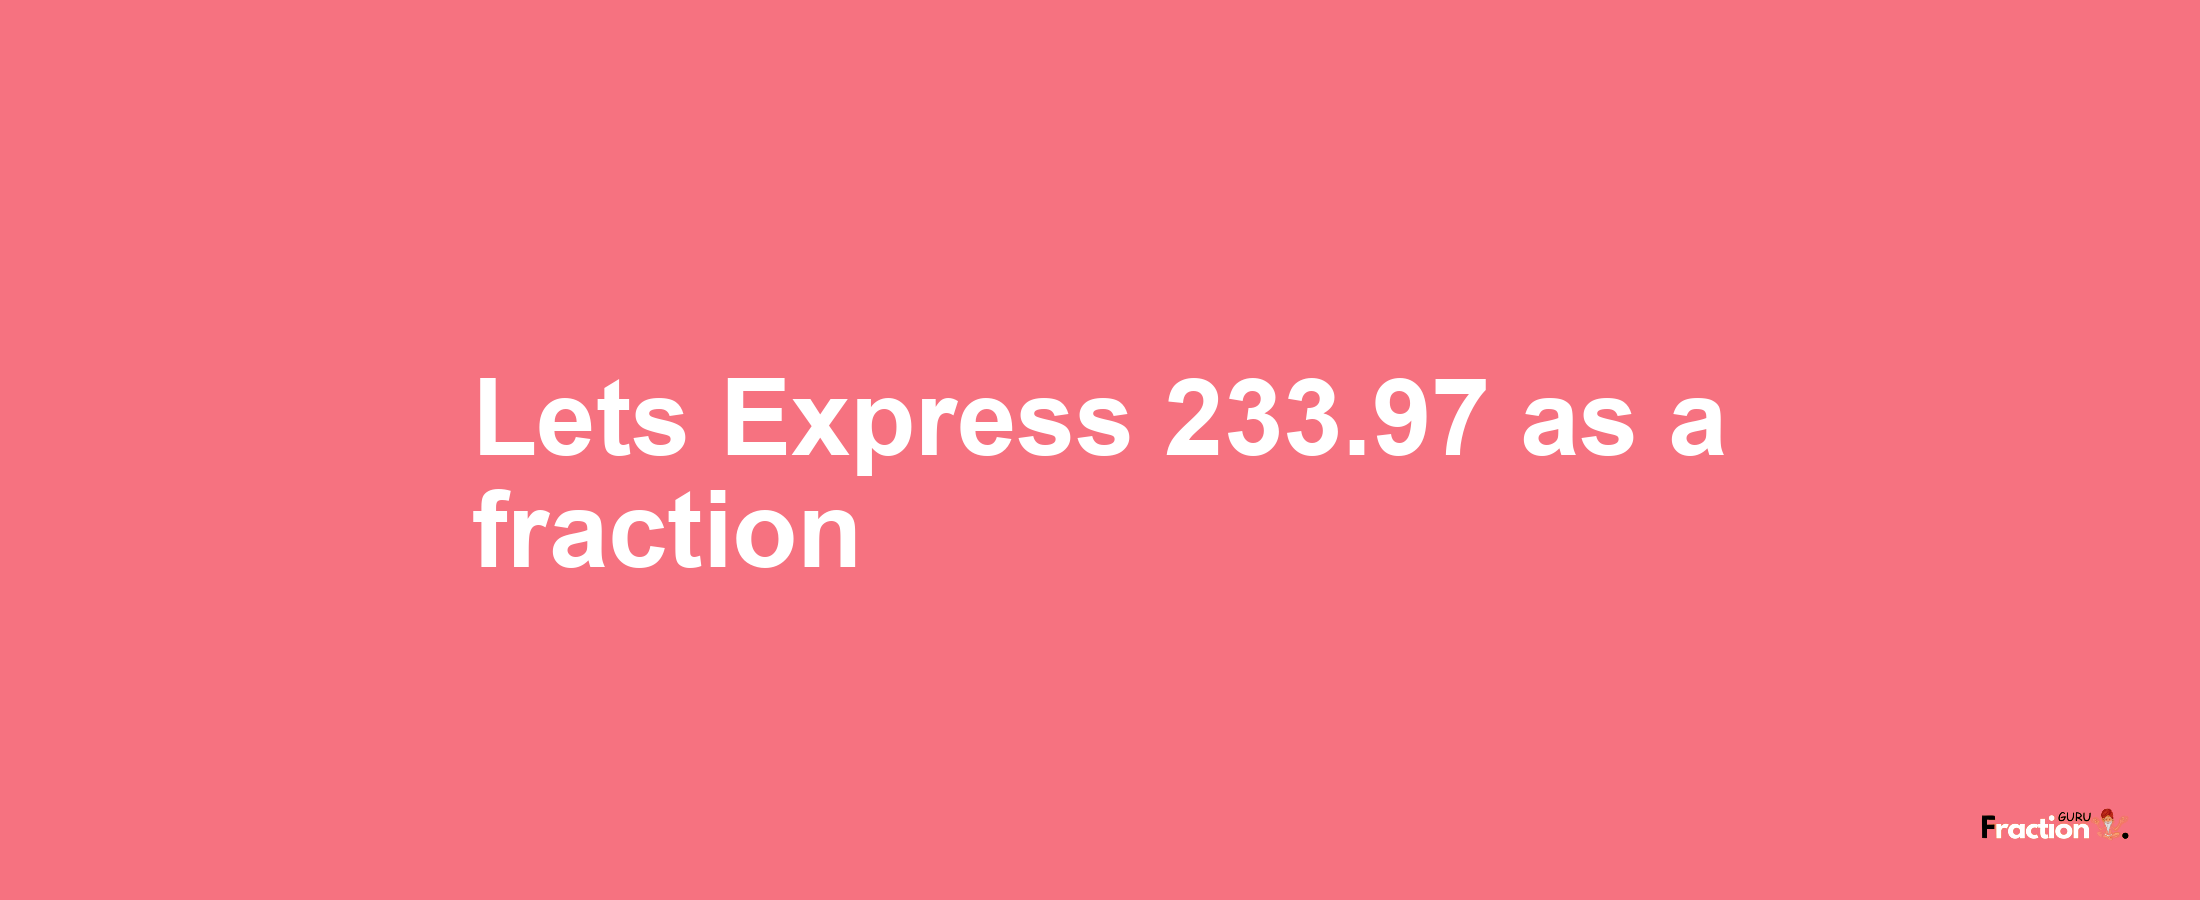 Lets Express 233.97 as afraction